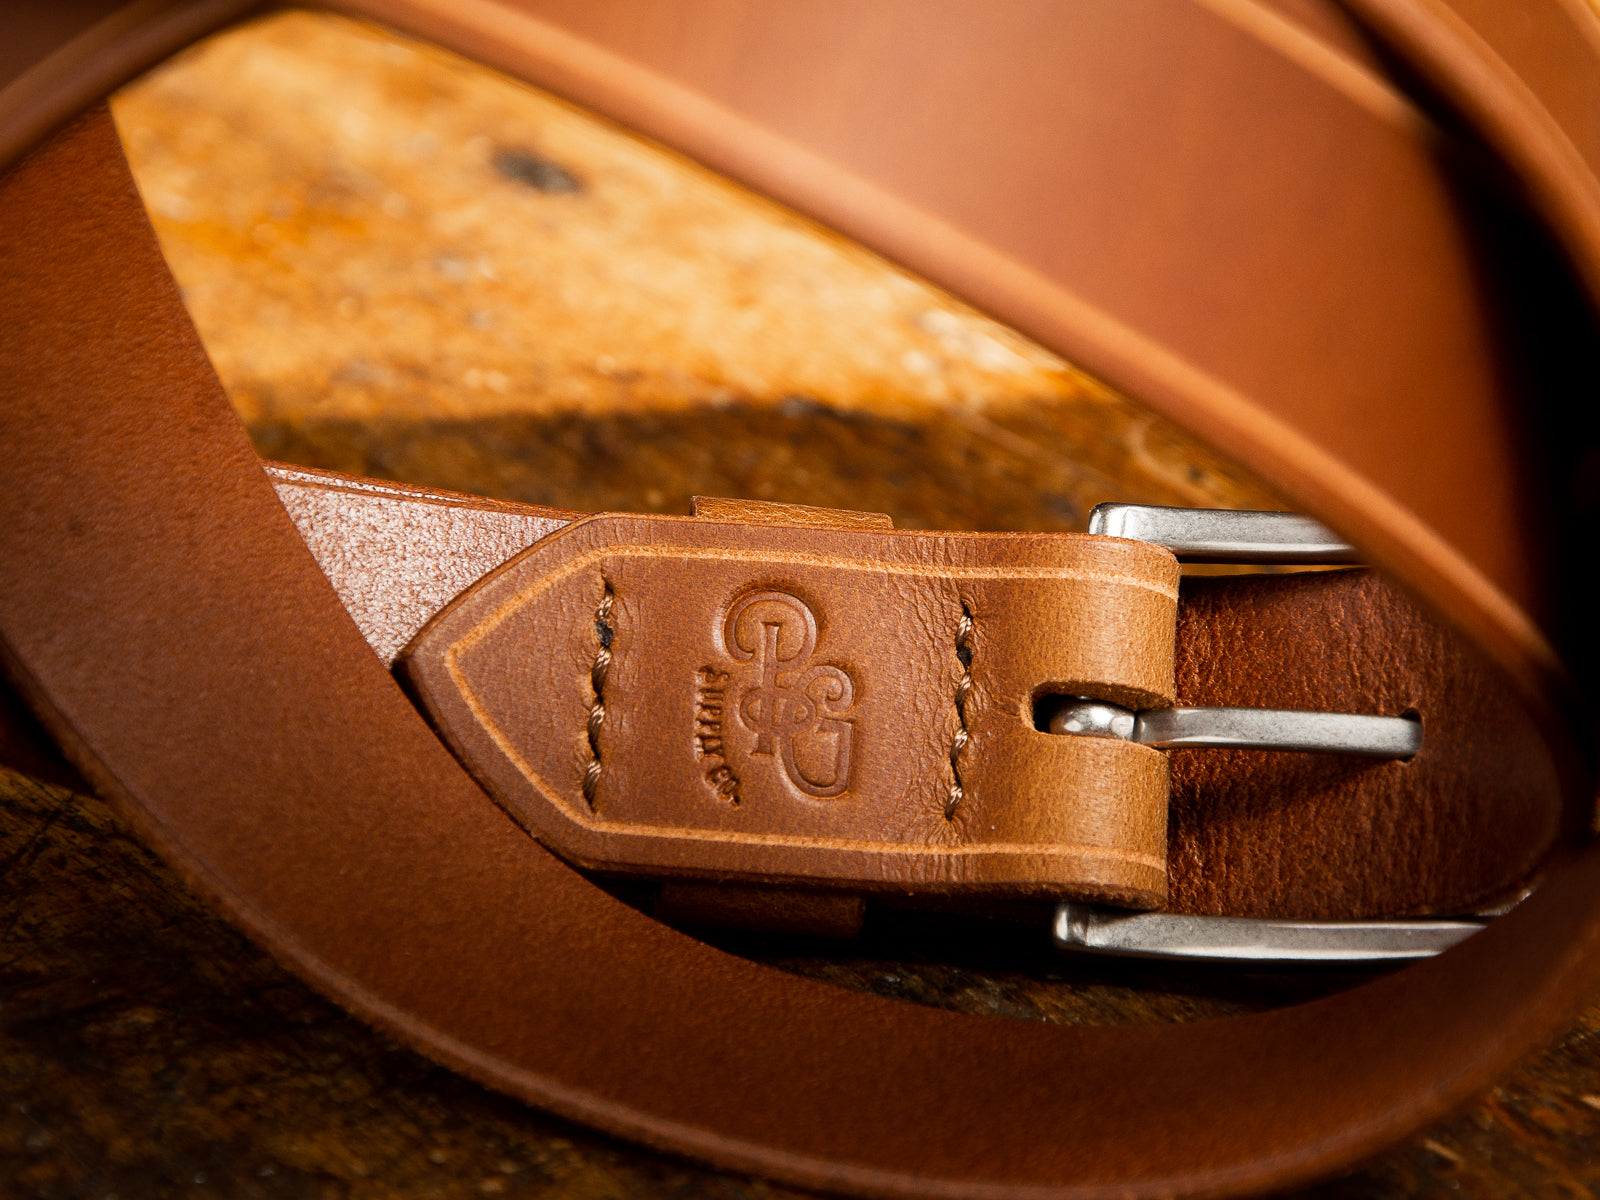 The Sterling Dress Belt in tan shown coiled revealing the embossing and hand stitched detail from the back side.